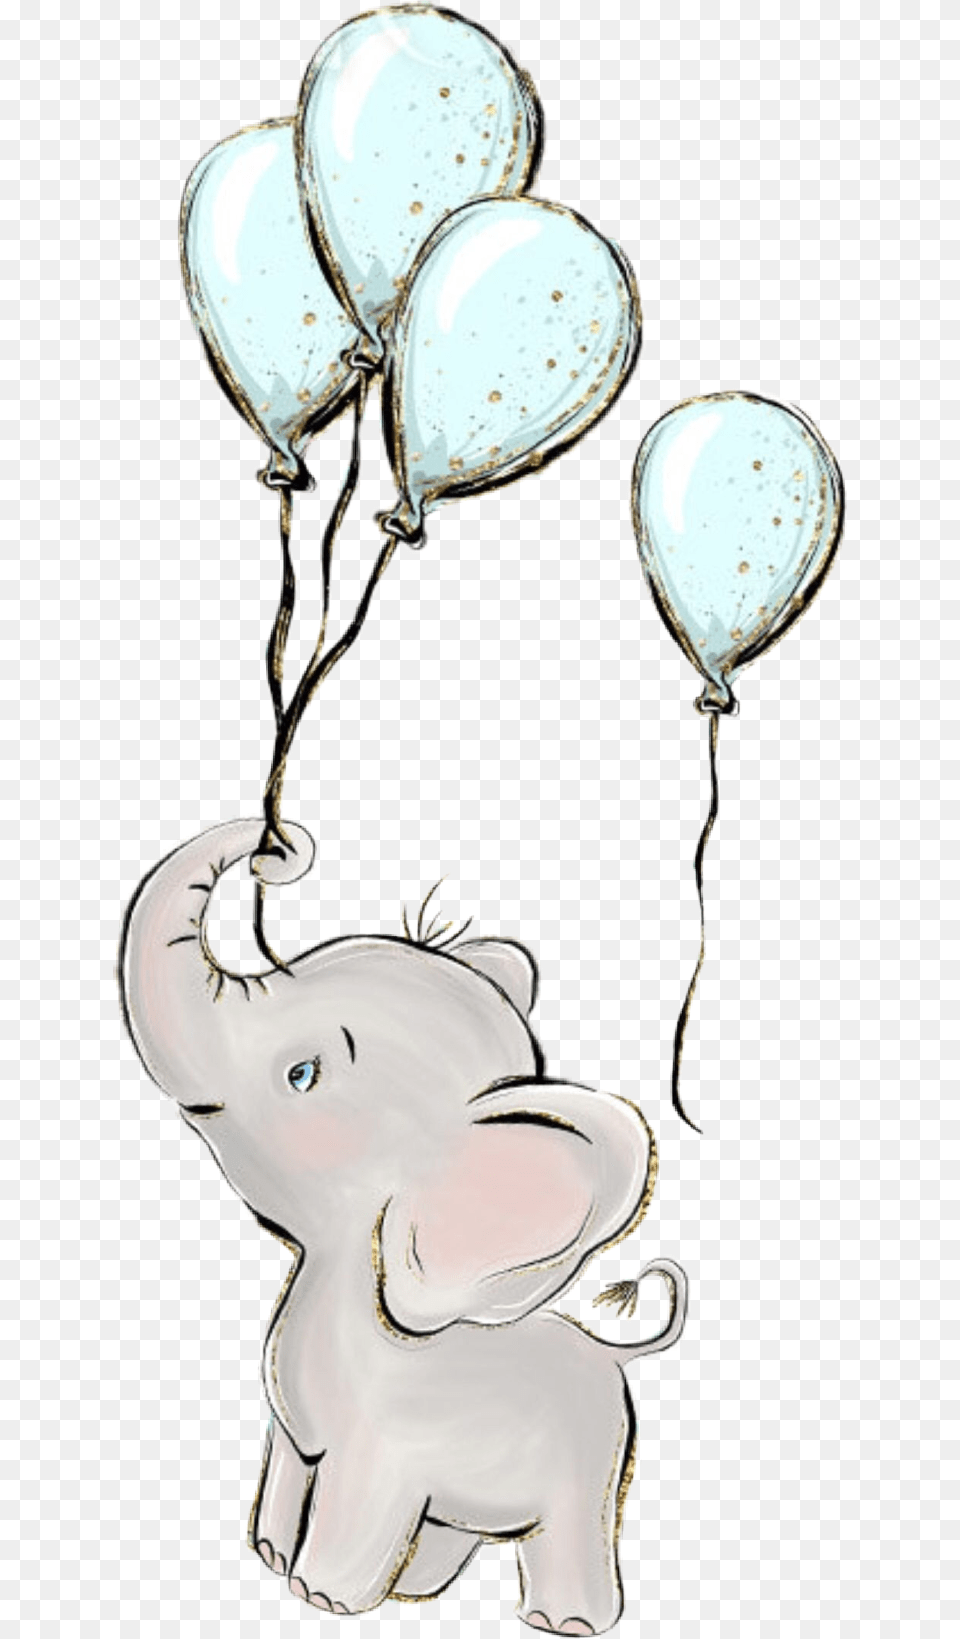 Watercolor Elephant Balloons Baby Boy Babyanimals Elephant With Balloons Clipart, Balloon, Person Free Transparent Png